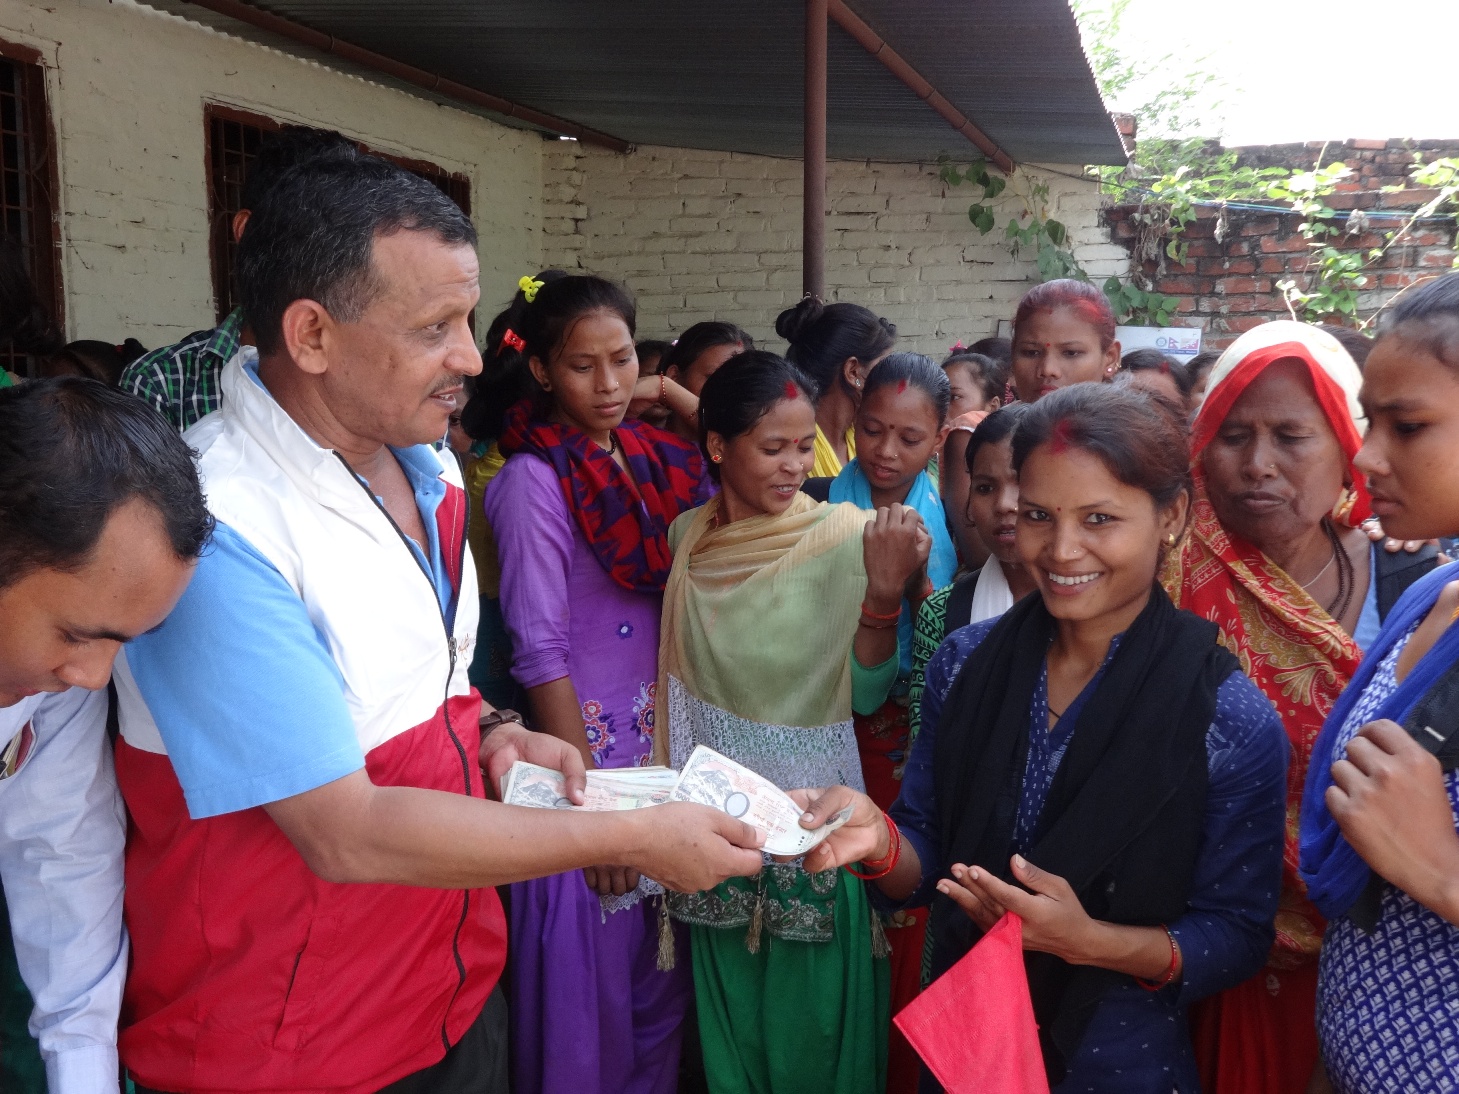 500 Nepal Families Have a New Beginning Thanks to You